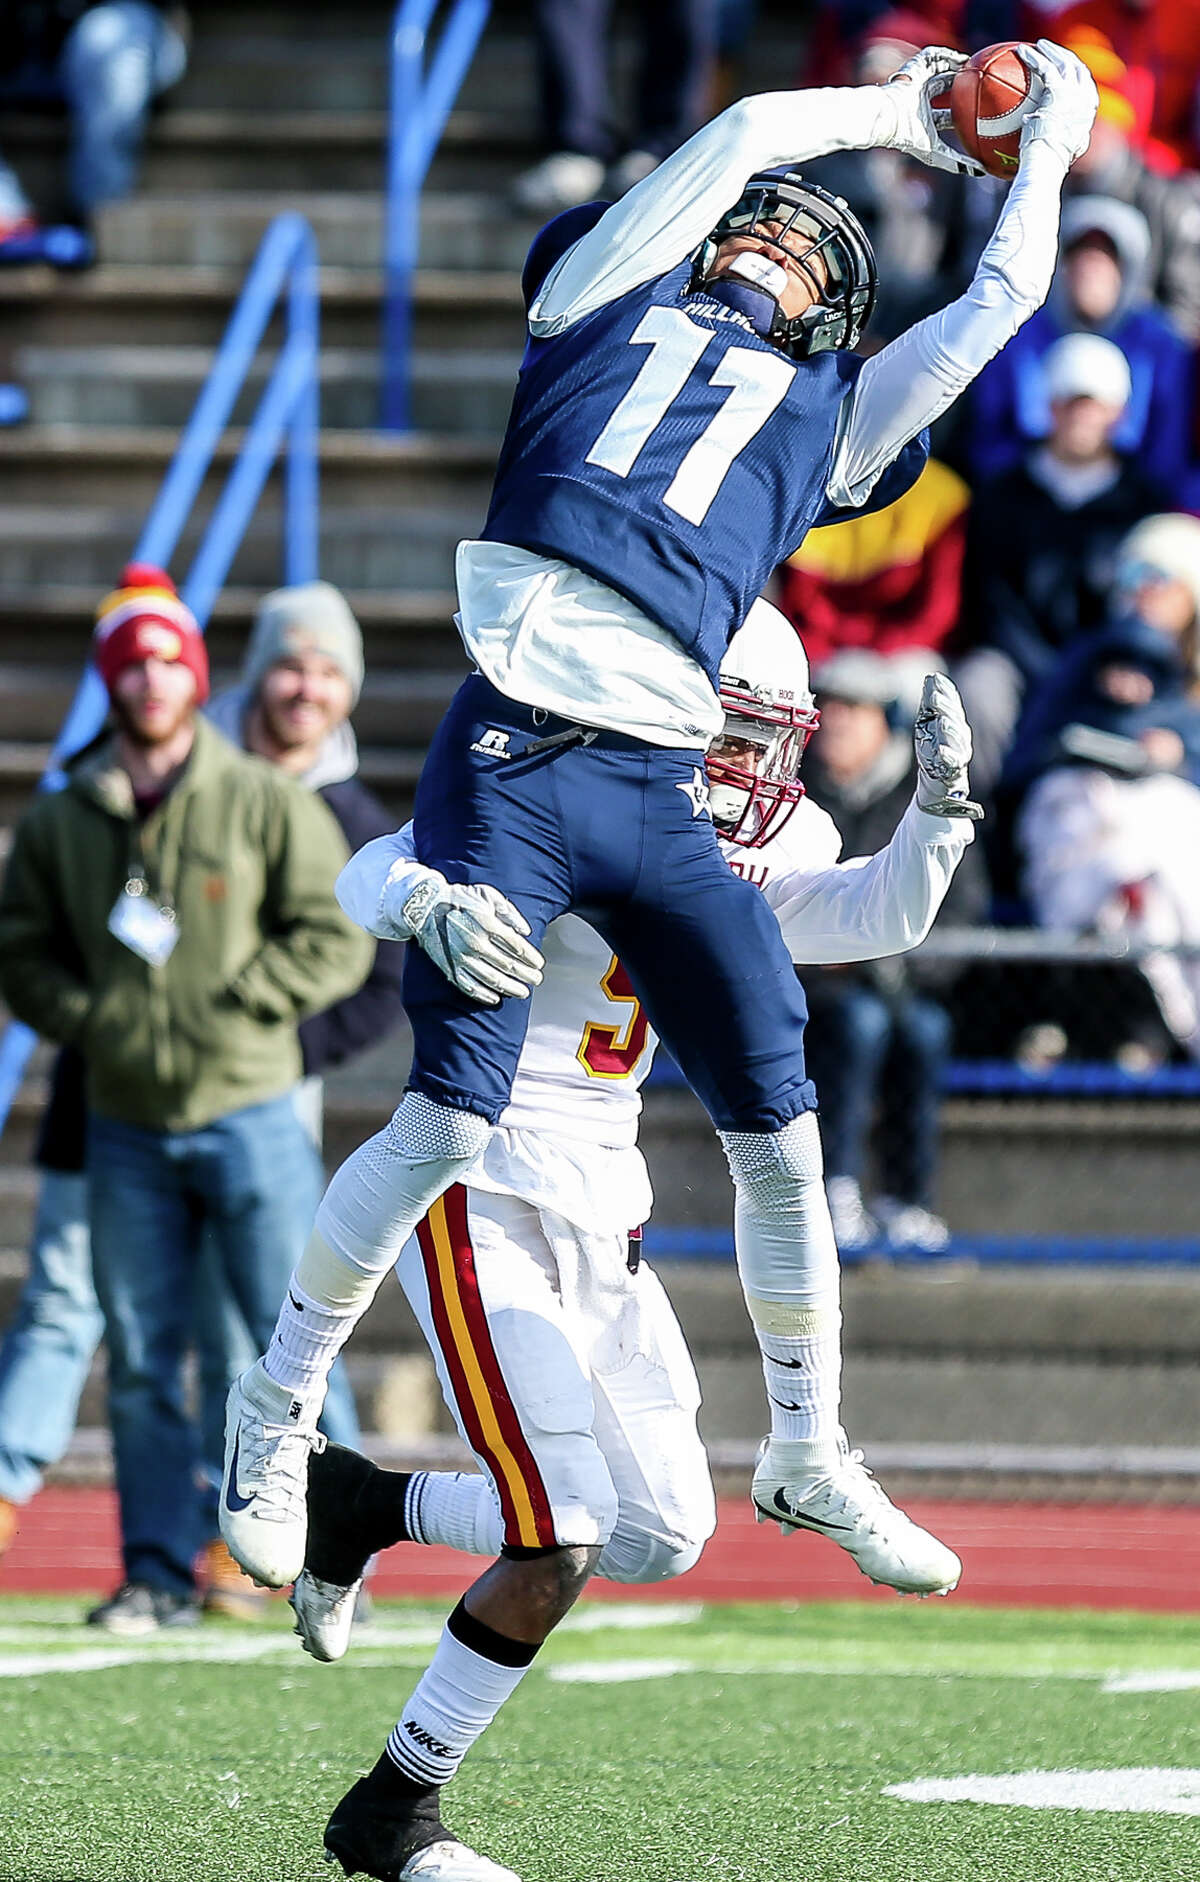 Hillhouse Academic Chase Kinzley (11) goes up for a reception over the top of St Joseph’s Robbie Miller during Hillhouse’s 42-21 win for the CIAC Class M State title.-John Vanacore/New Haven Register